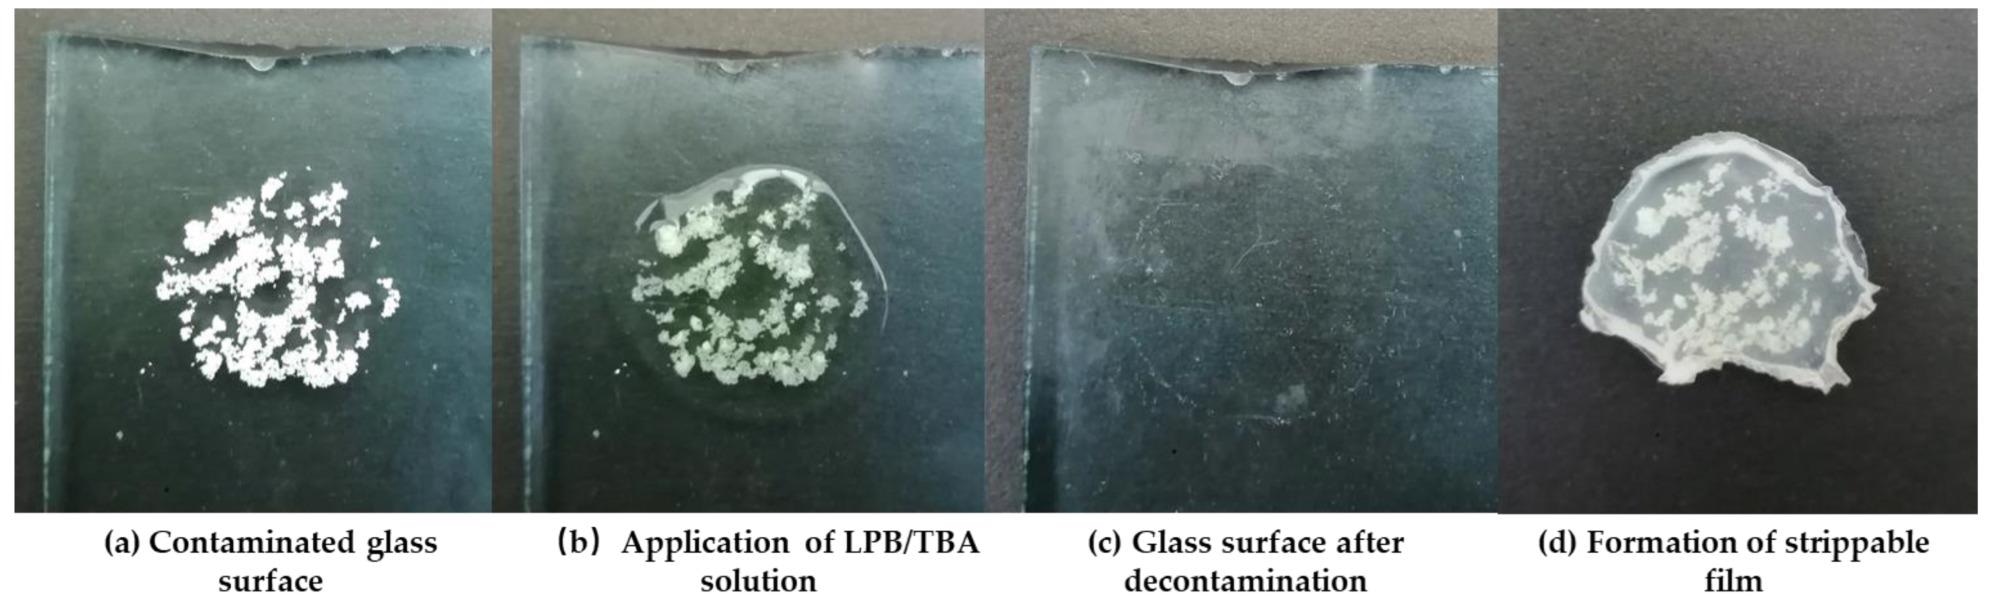 Decontamination procedure of strippable film on glass surface.